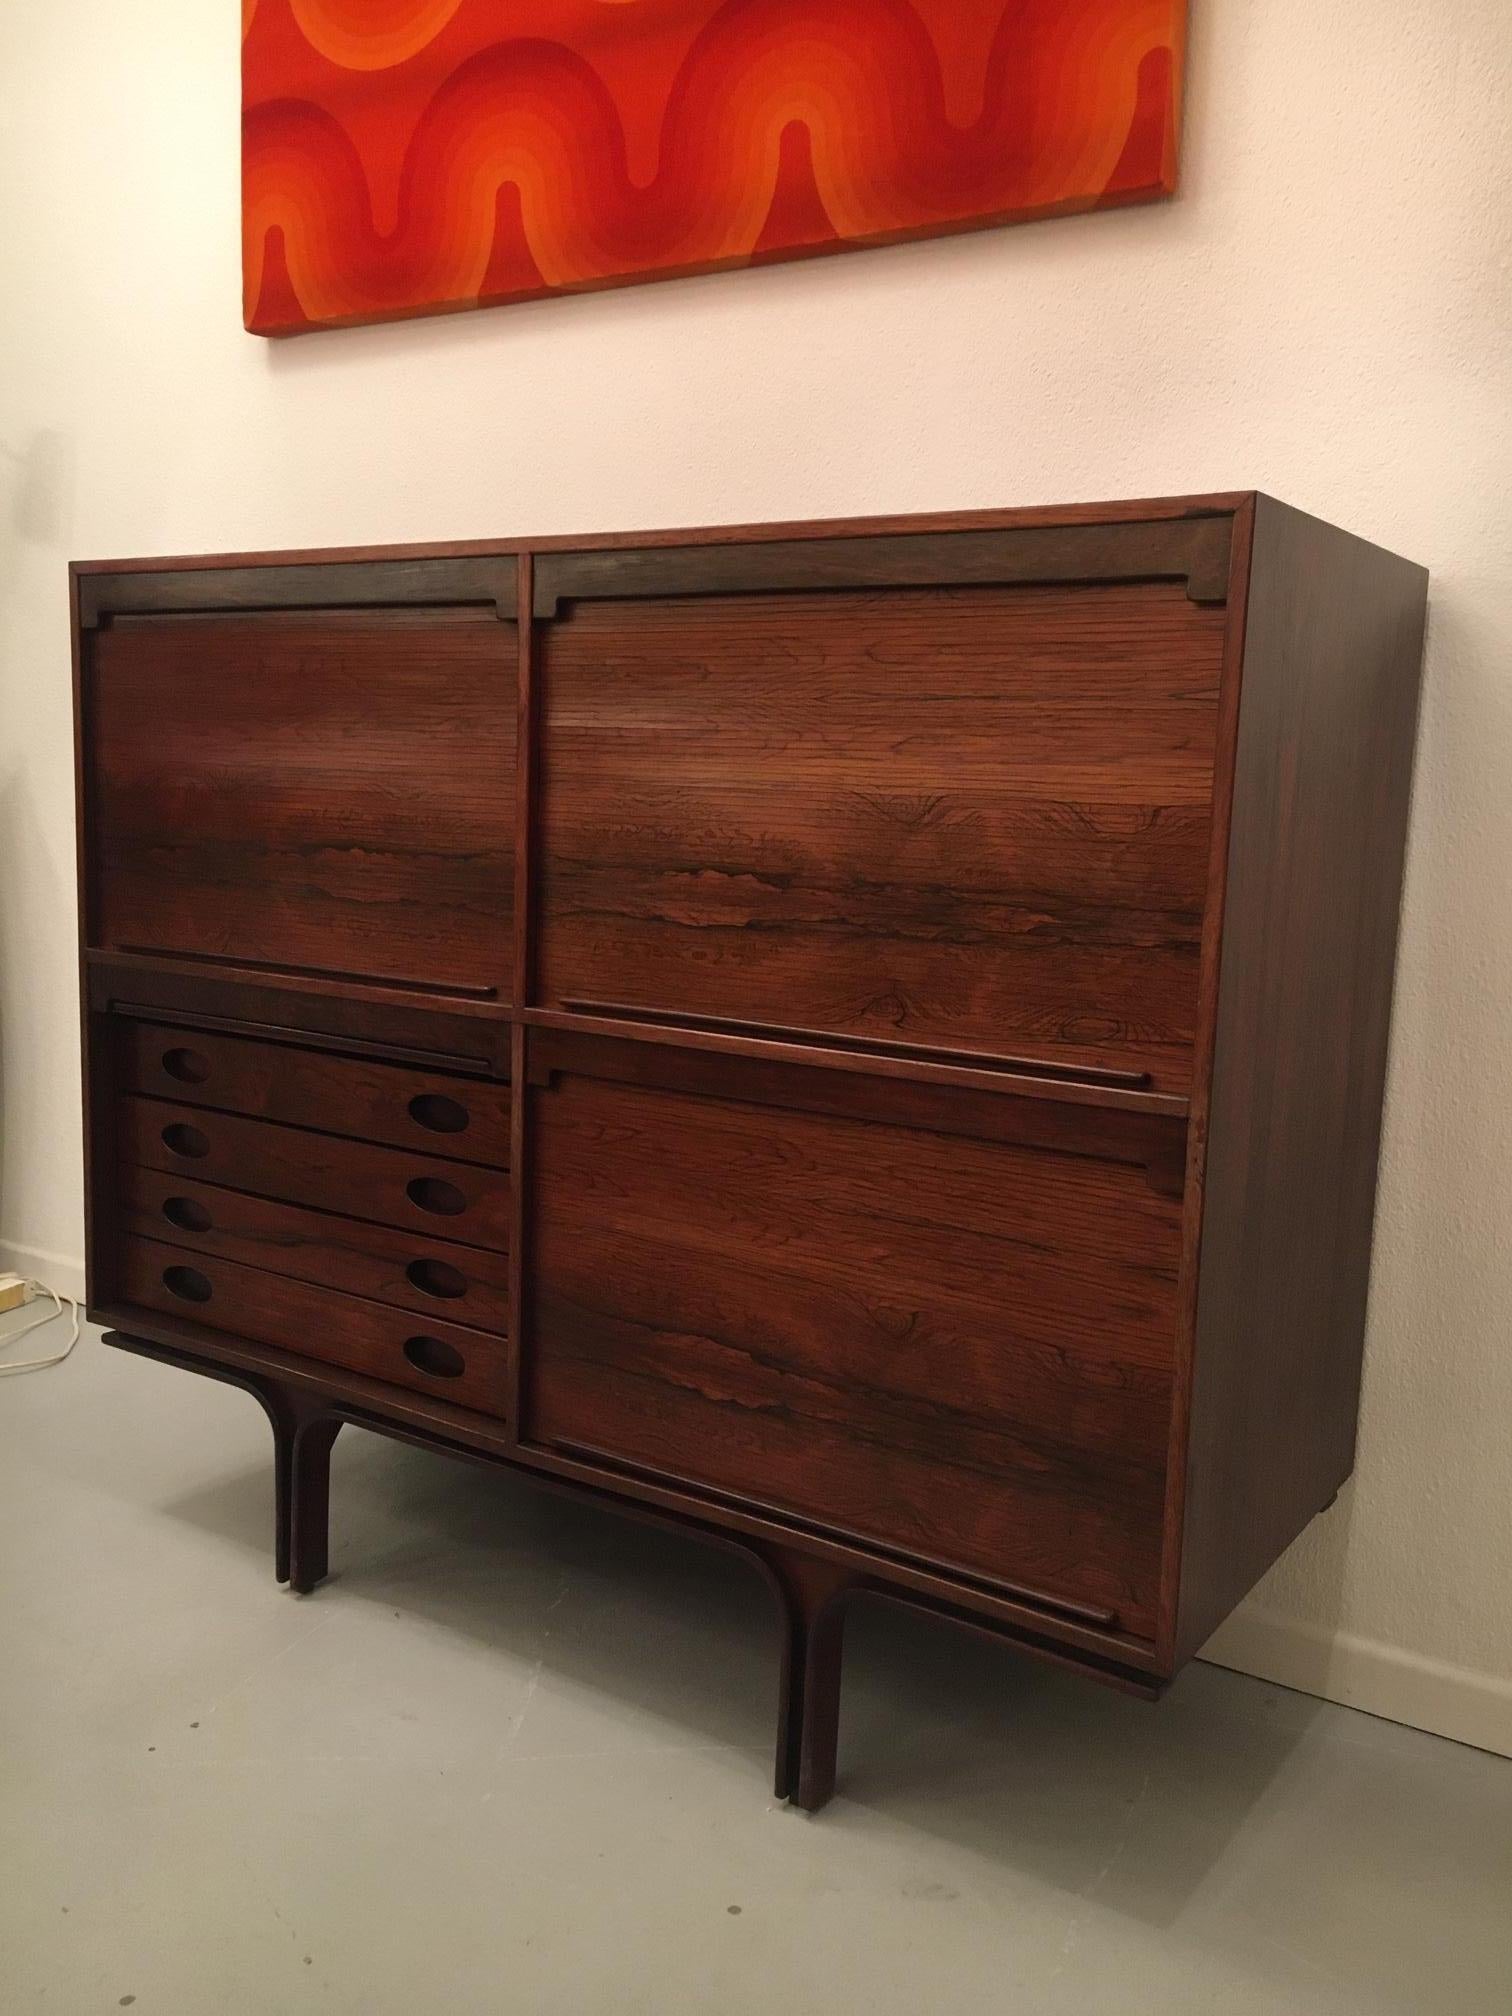 Rosewood Highboard by Gianfranco Frattini Produced by Bernini, Italy ca. 1957 5